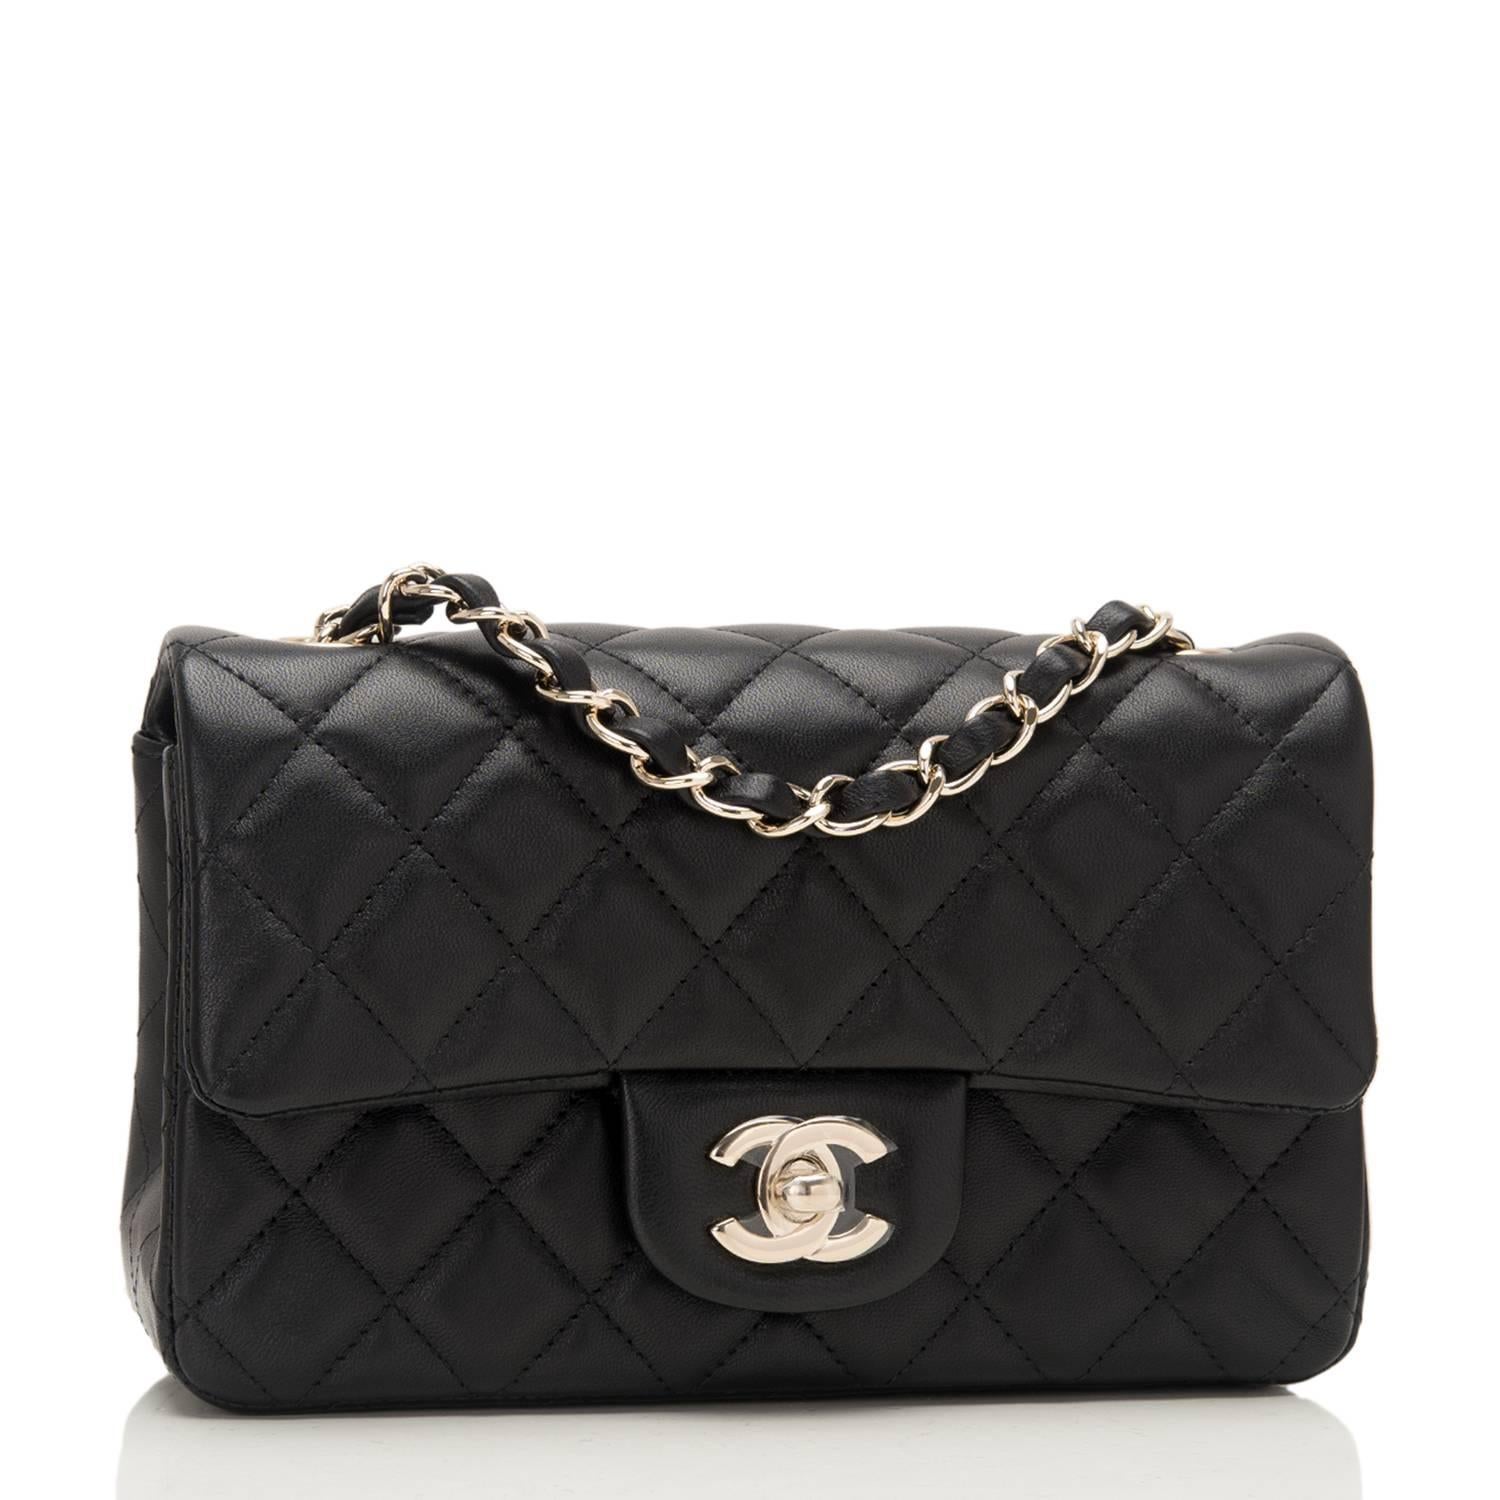 Chanel Rectangular Mini Classic flap bag of black lambskin leather with gold tone hardware.

This bag has a front flap with signature CC turnlock closure, rear half moon pocket and single interwoven black leather and gold tone chain link